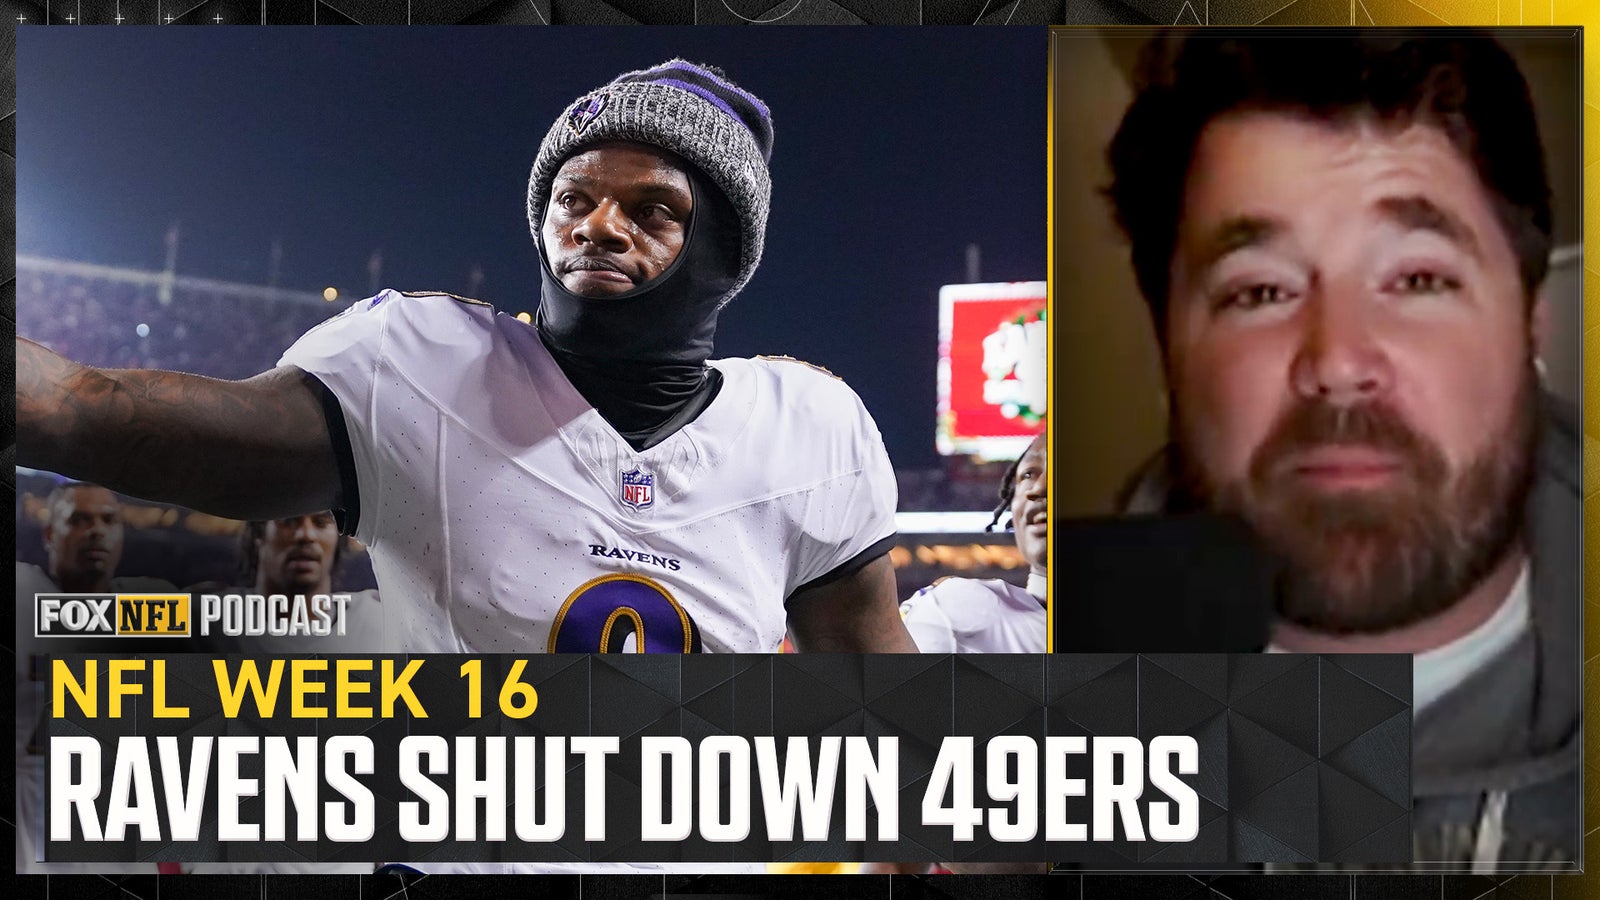 Dave Helman reacts to the Ravens dominating the 49ers on MNF